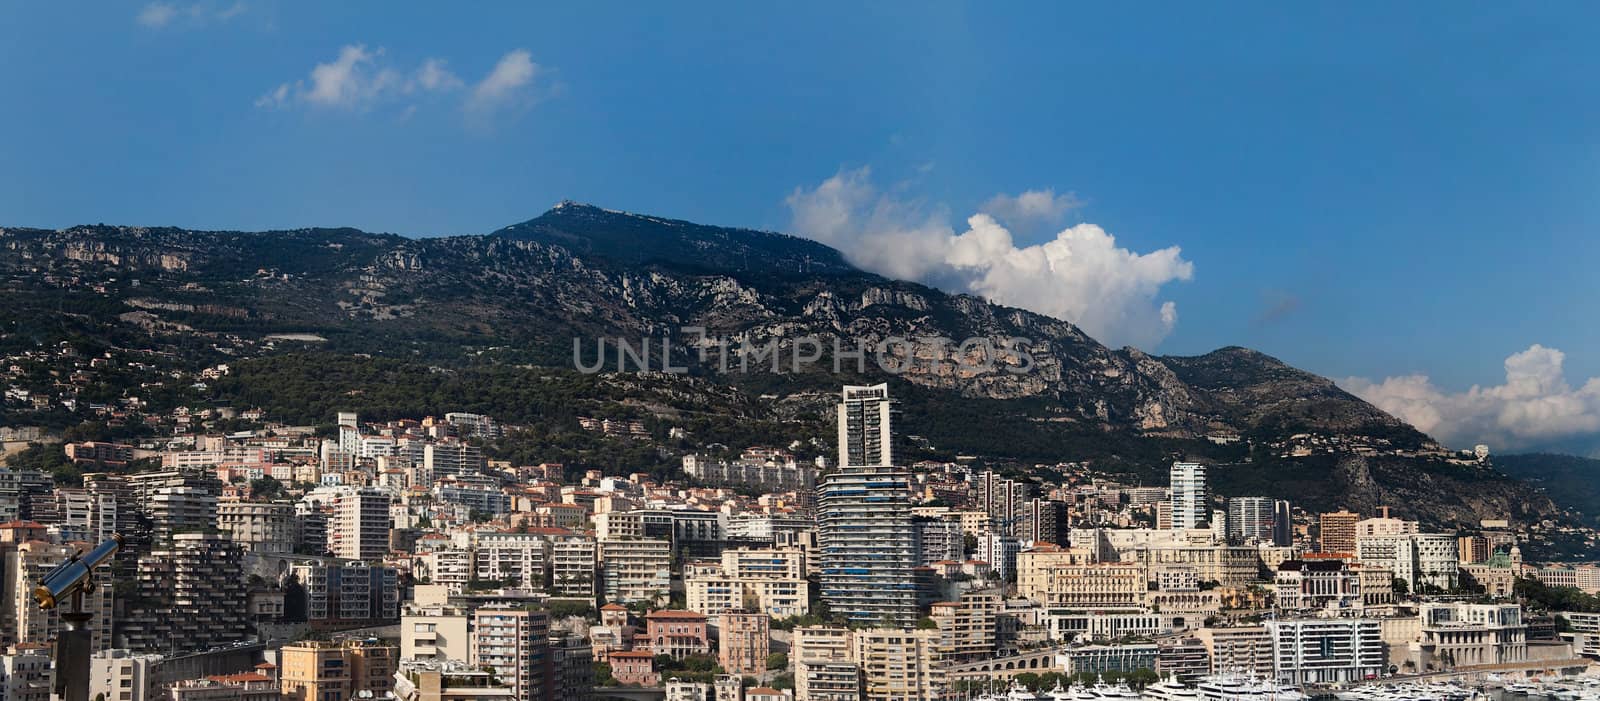 The skyline and harbor of downtown Monaco